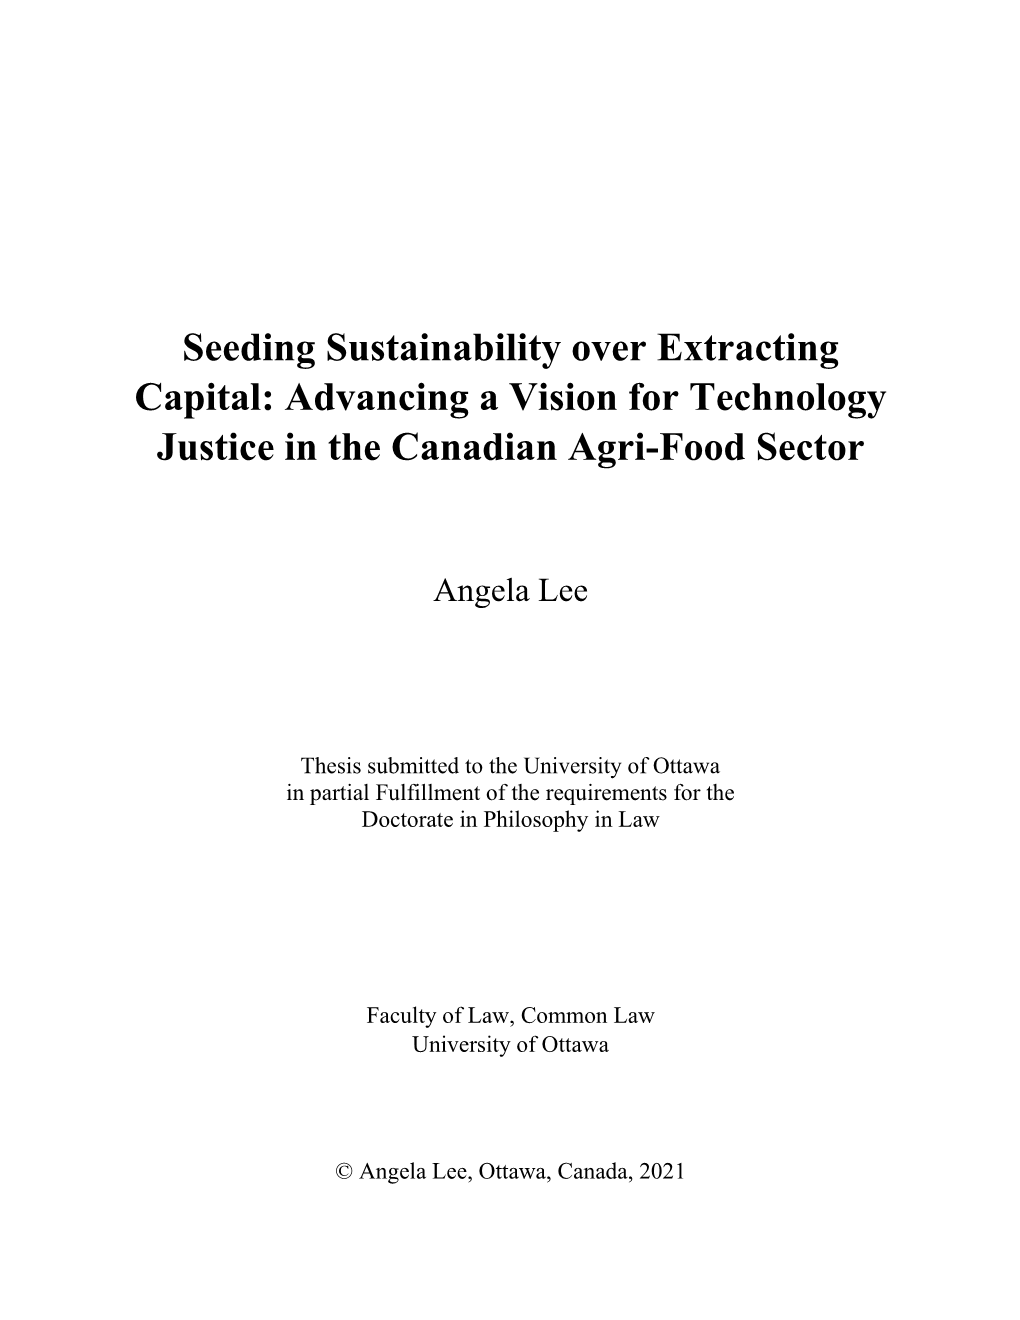 Advancing a Vision for Technology Justice in the Canadian Agri-Food Sector